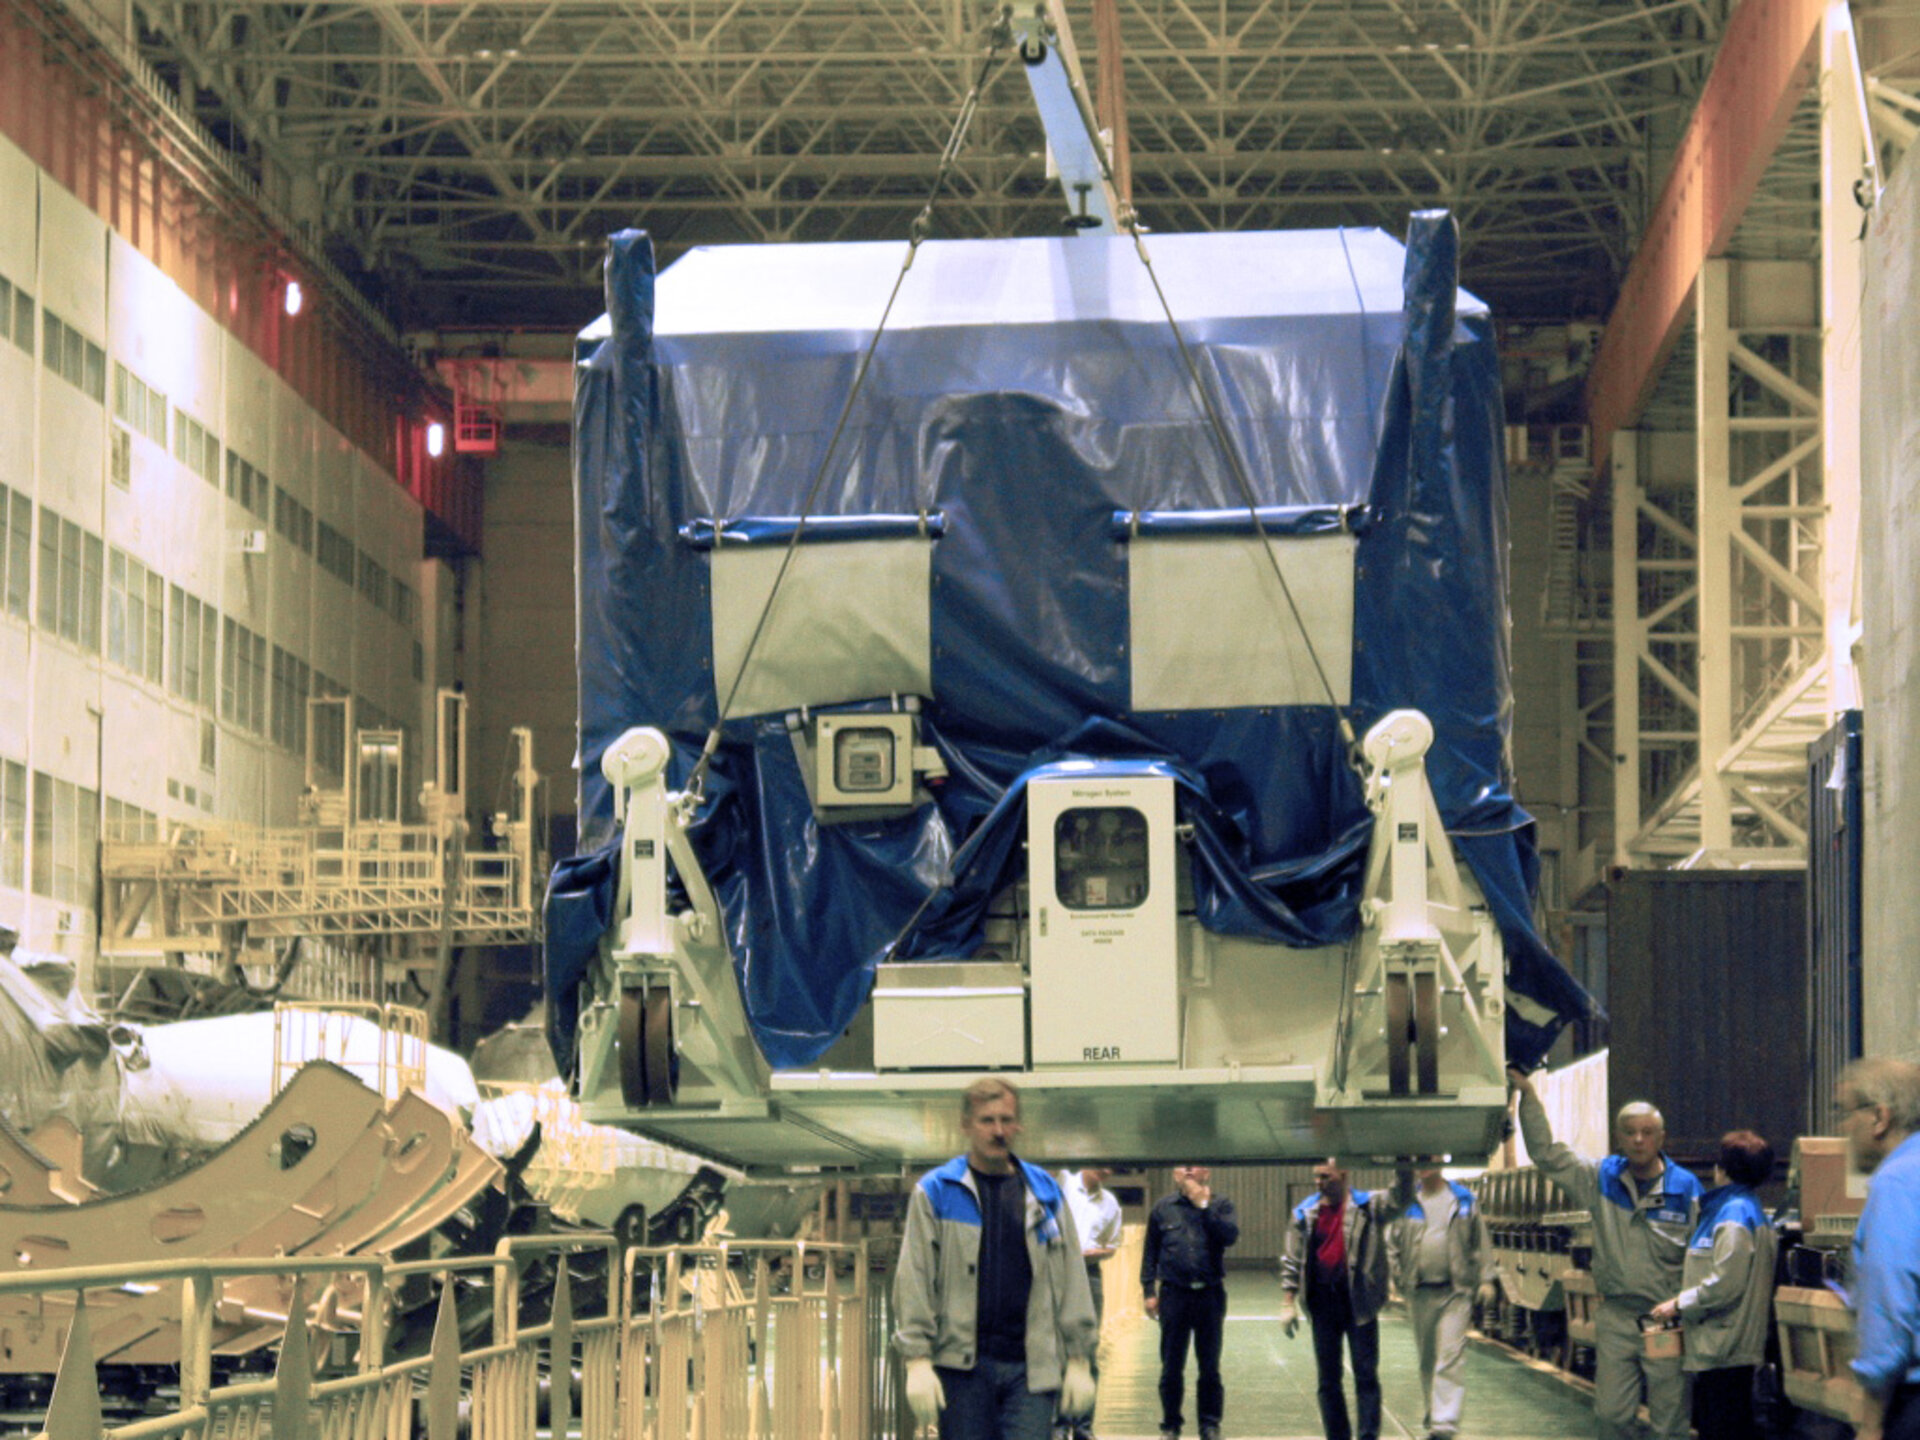 MetOp's Payload Module Container unloaded